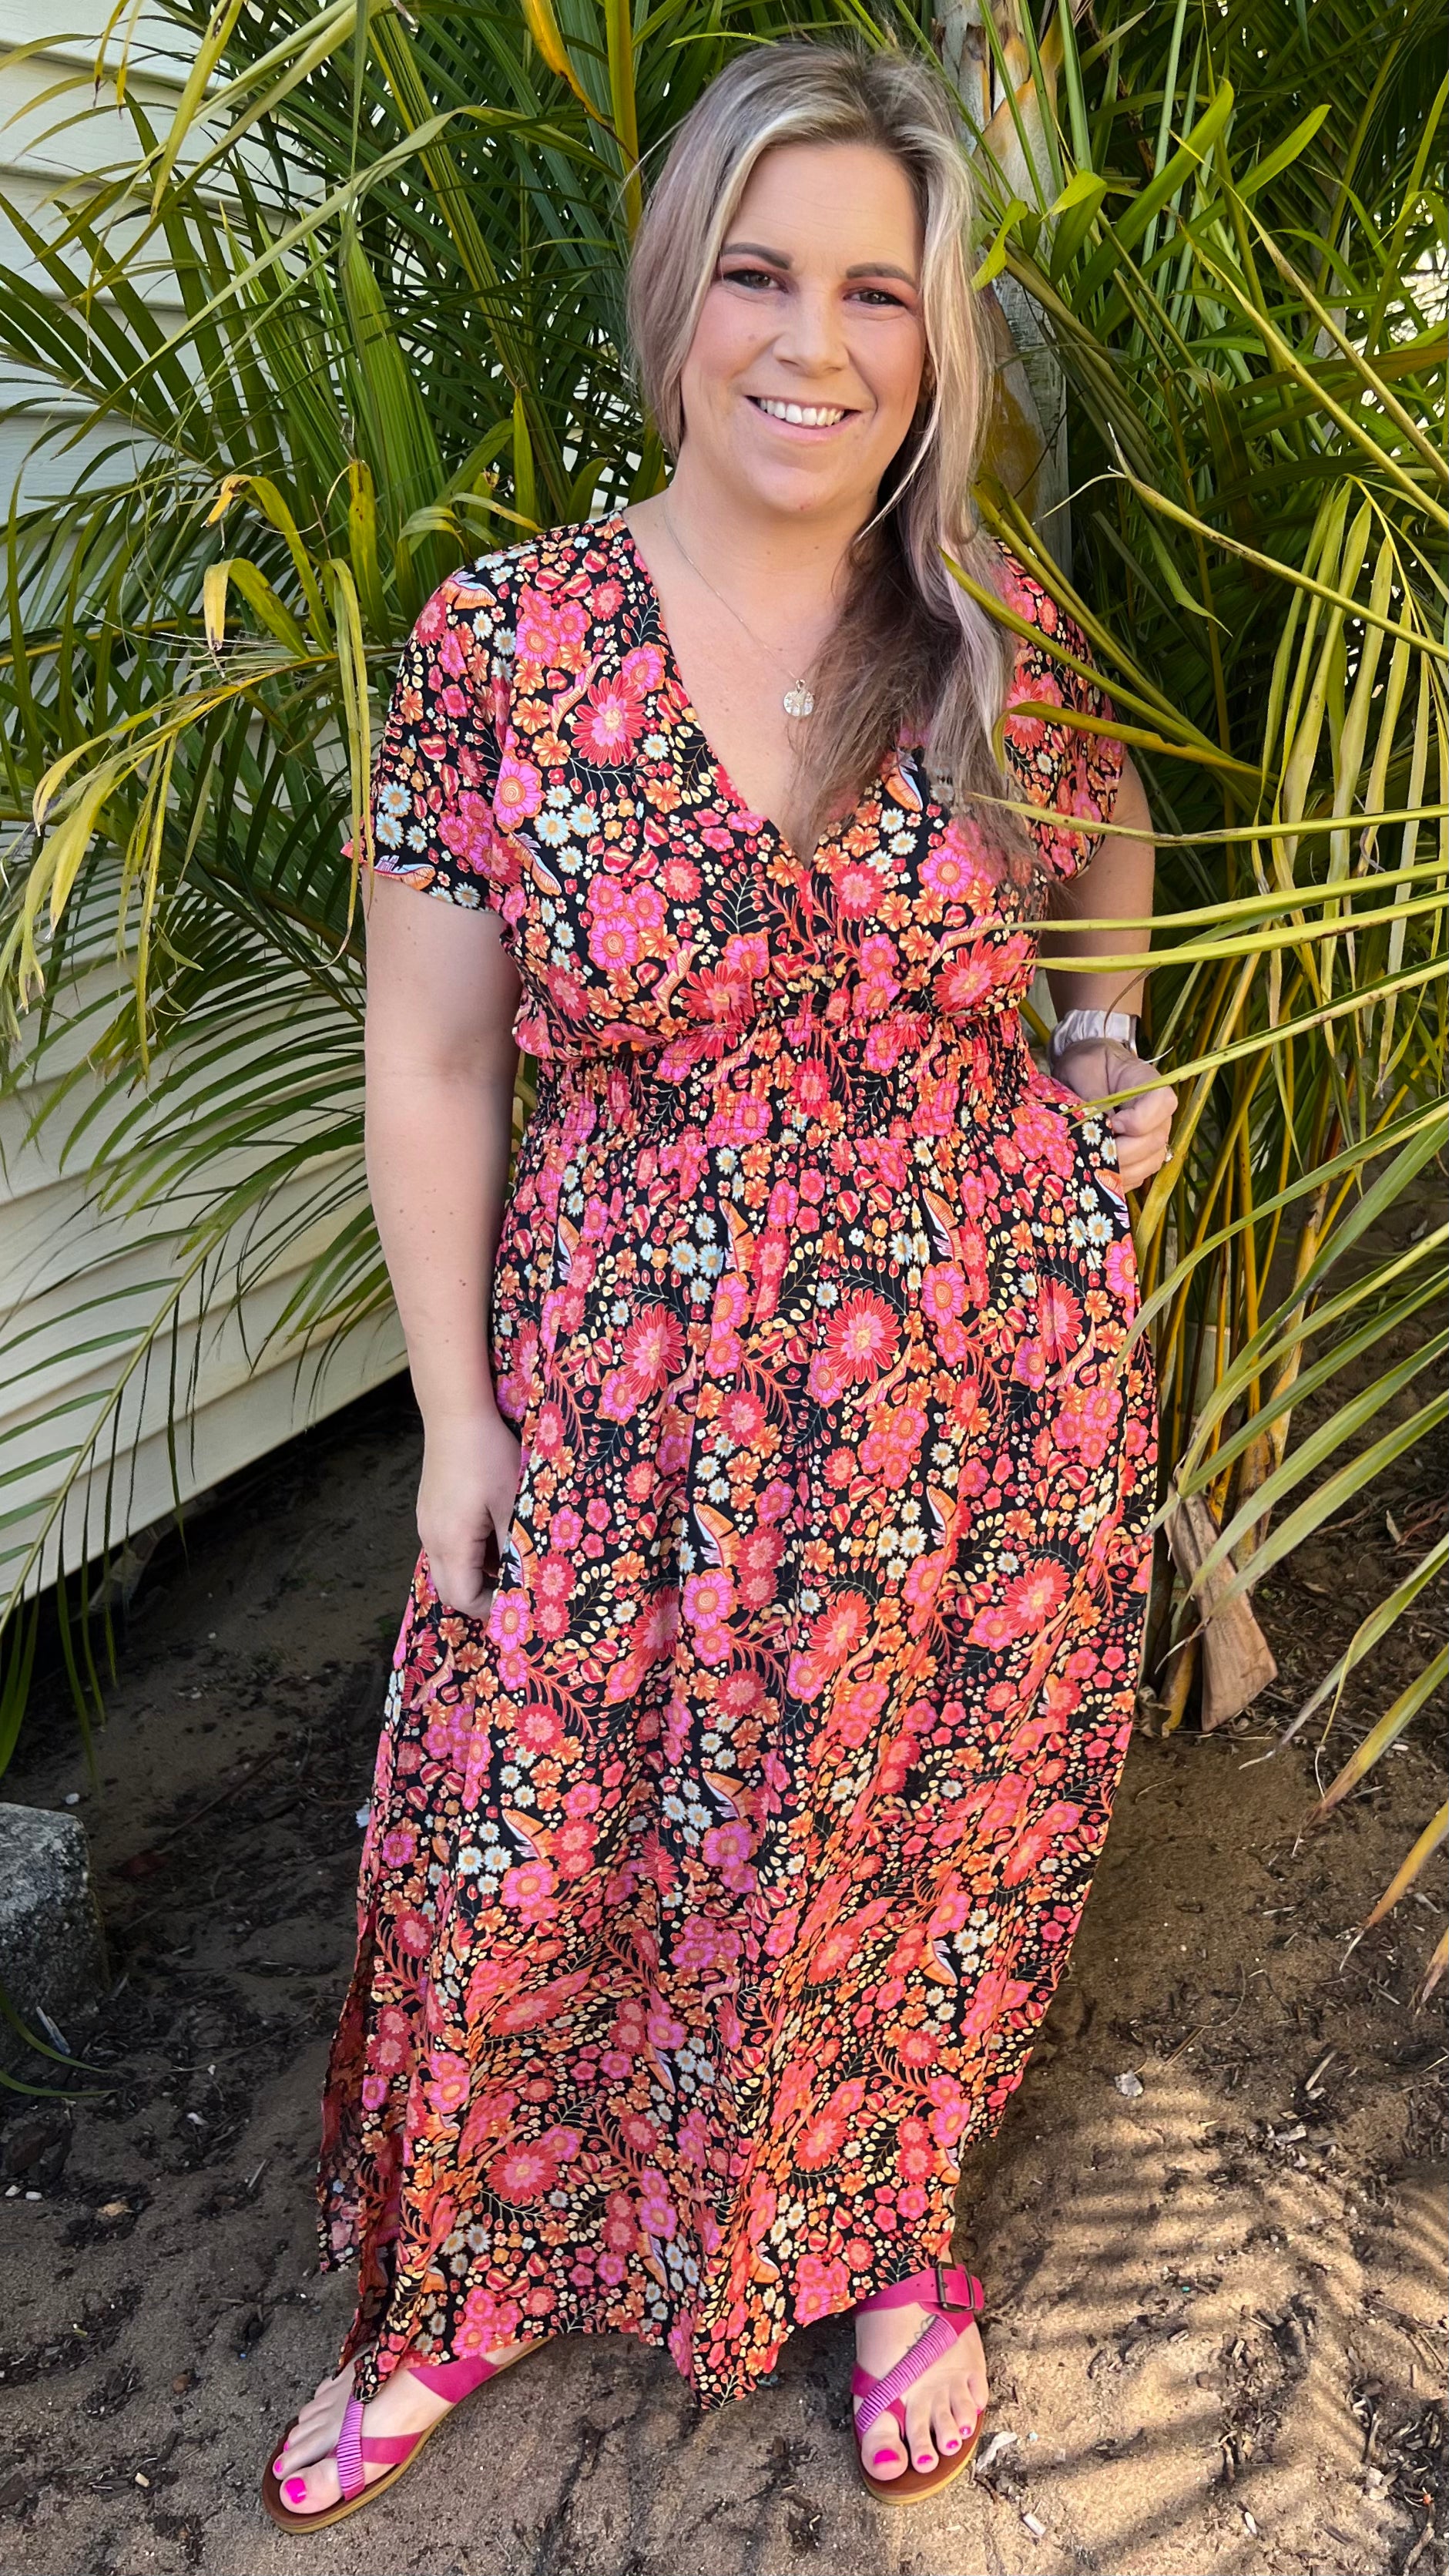 The Zen Dress features the stunning Daydreamer print from Honey &amp; Stone Co

It has tshirt length sleeves with a slight flutter and comes into a v at the bust
The - Zen Maxi Dress - Daydreamer - Honey & Stone